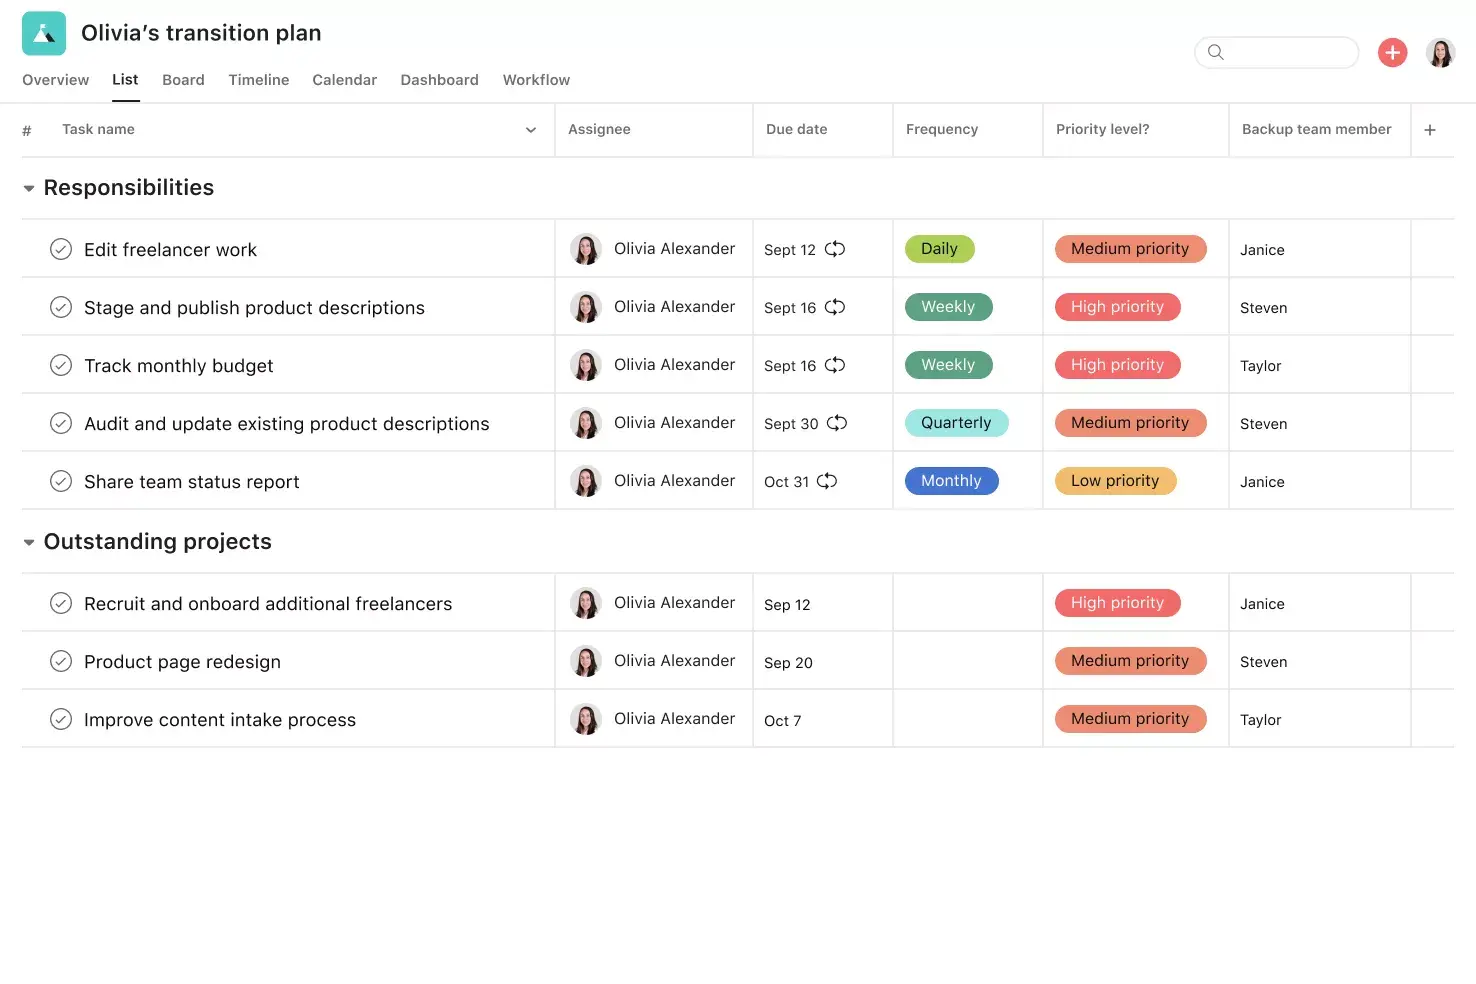 [product ui] Transition plan project in Asana, spreadsheet-style project view (List)